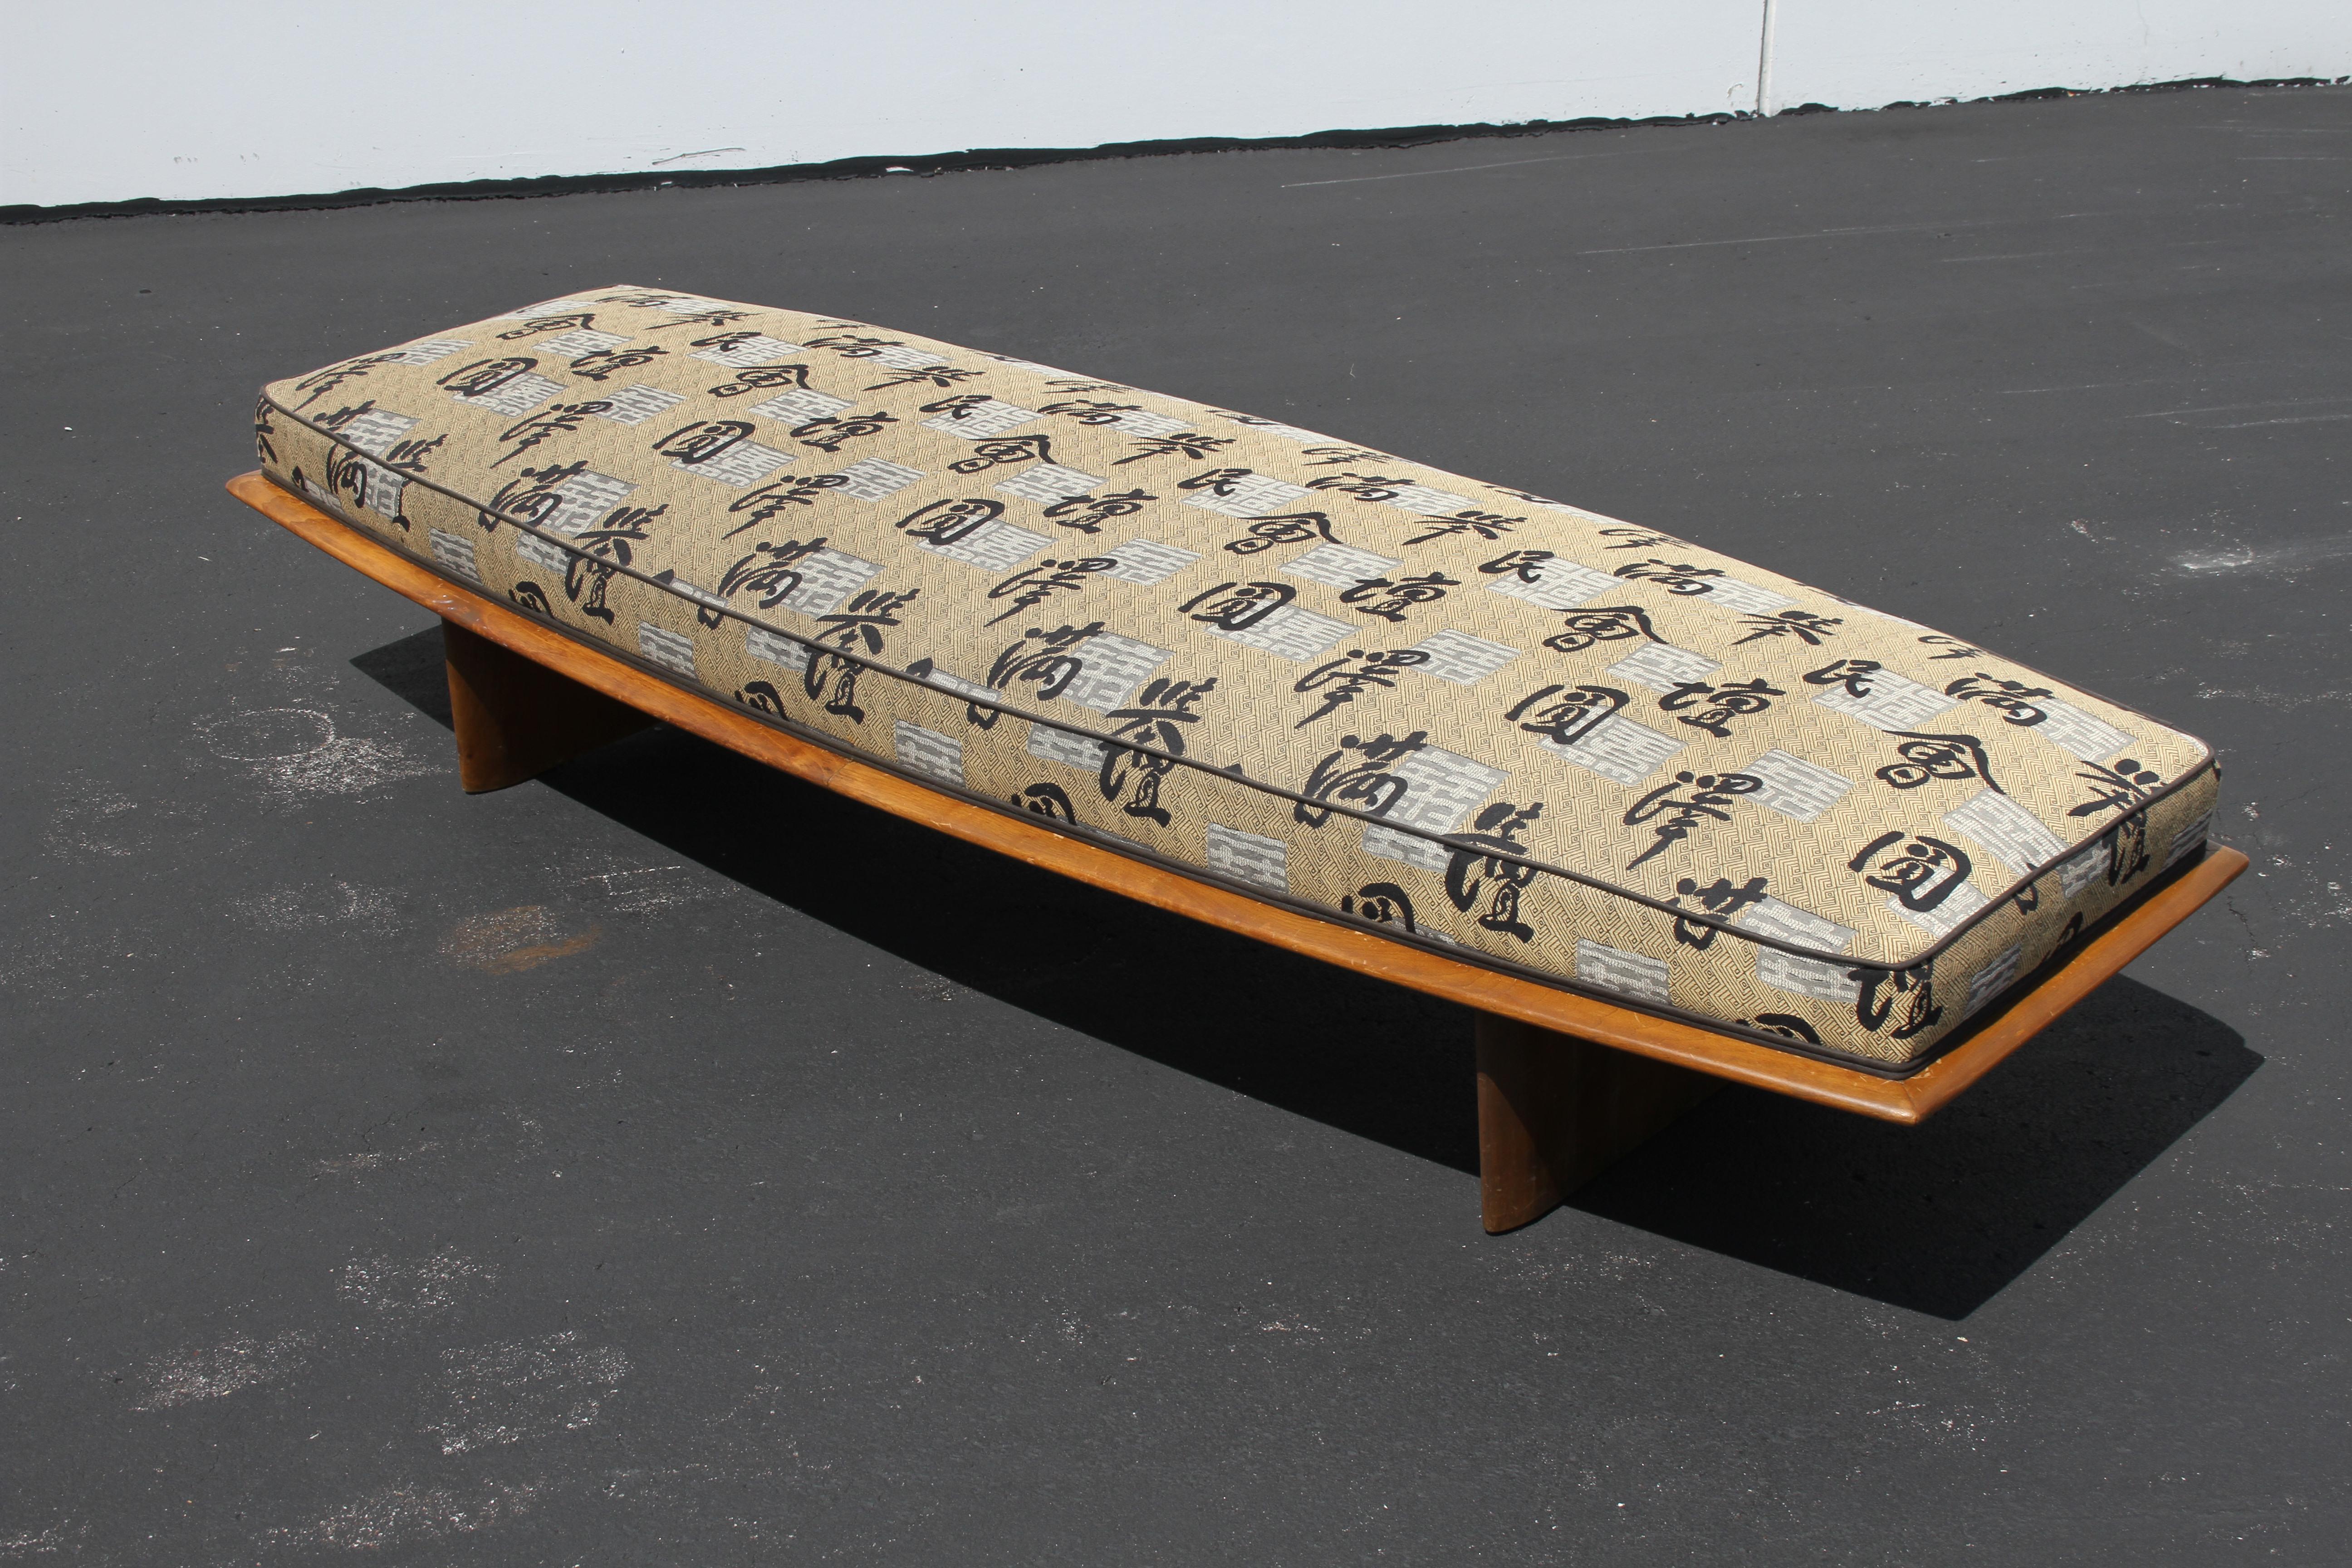 Rare T. H. Robsjohn-Gibbings for Widdicomb daybed, boat shaped upholstered form on plinth tapered legs and tapered wood surround. Shown in original finish with older reupholstery. Price includes wood frame refinishing prior to shipping, custom stain